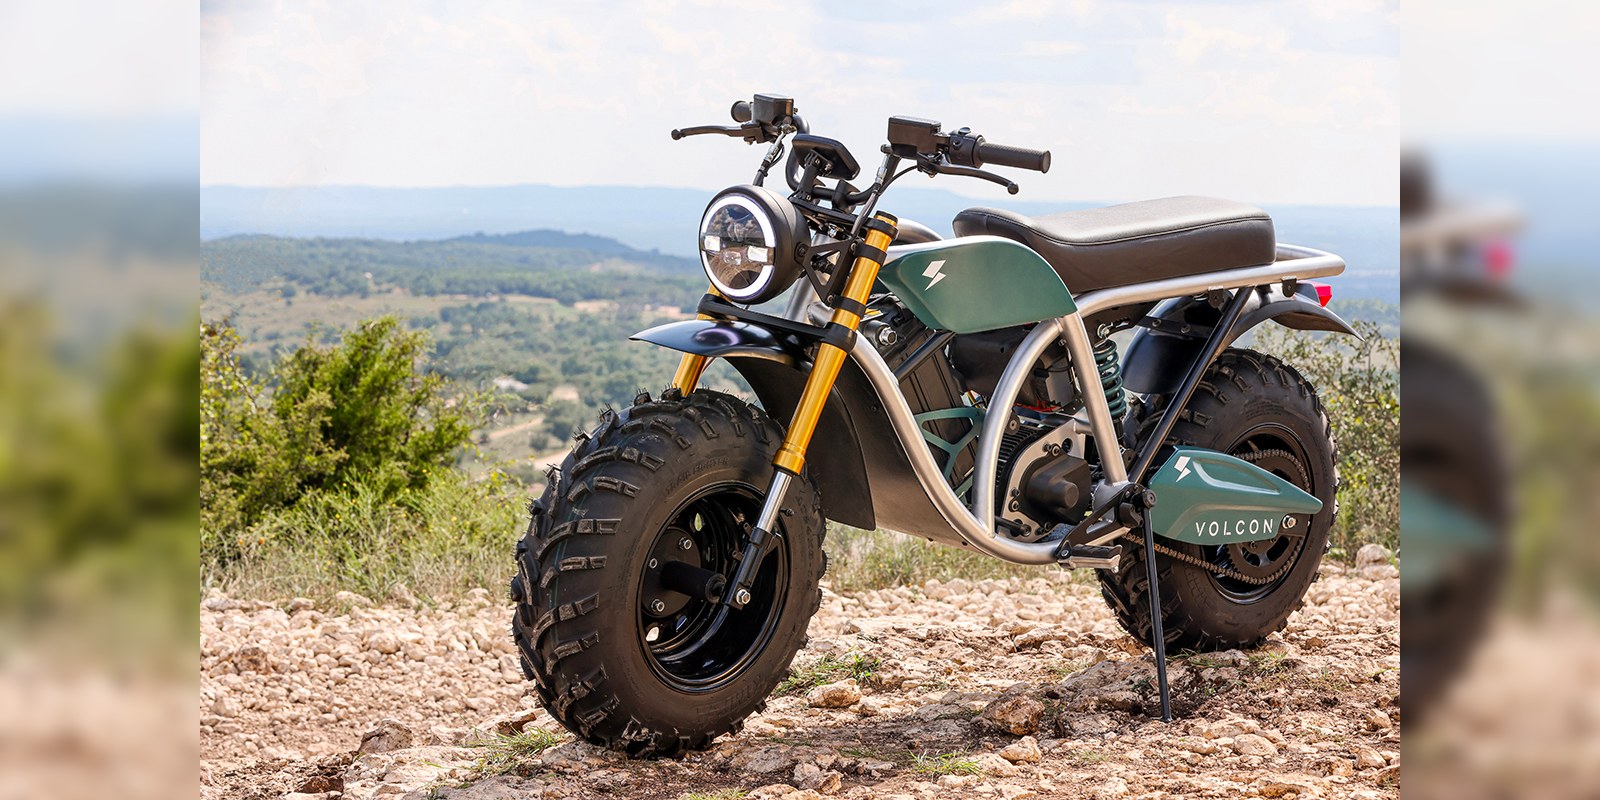 Watch Volcon Grunt off-road electric motorcycle seen in new testing video